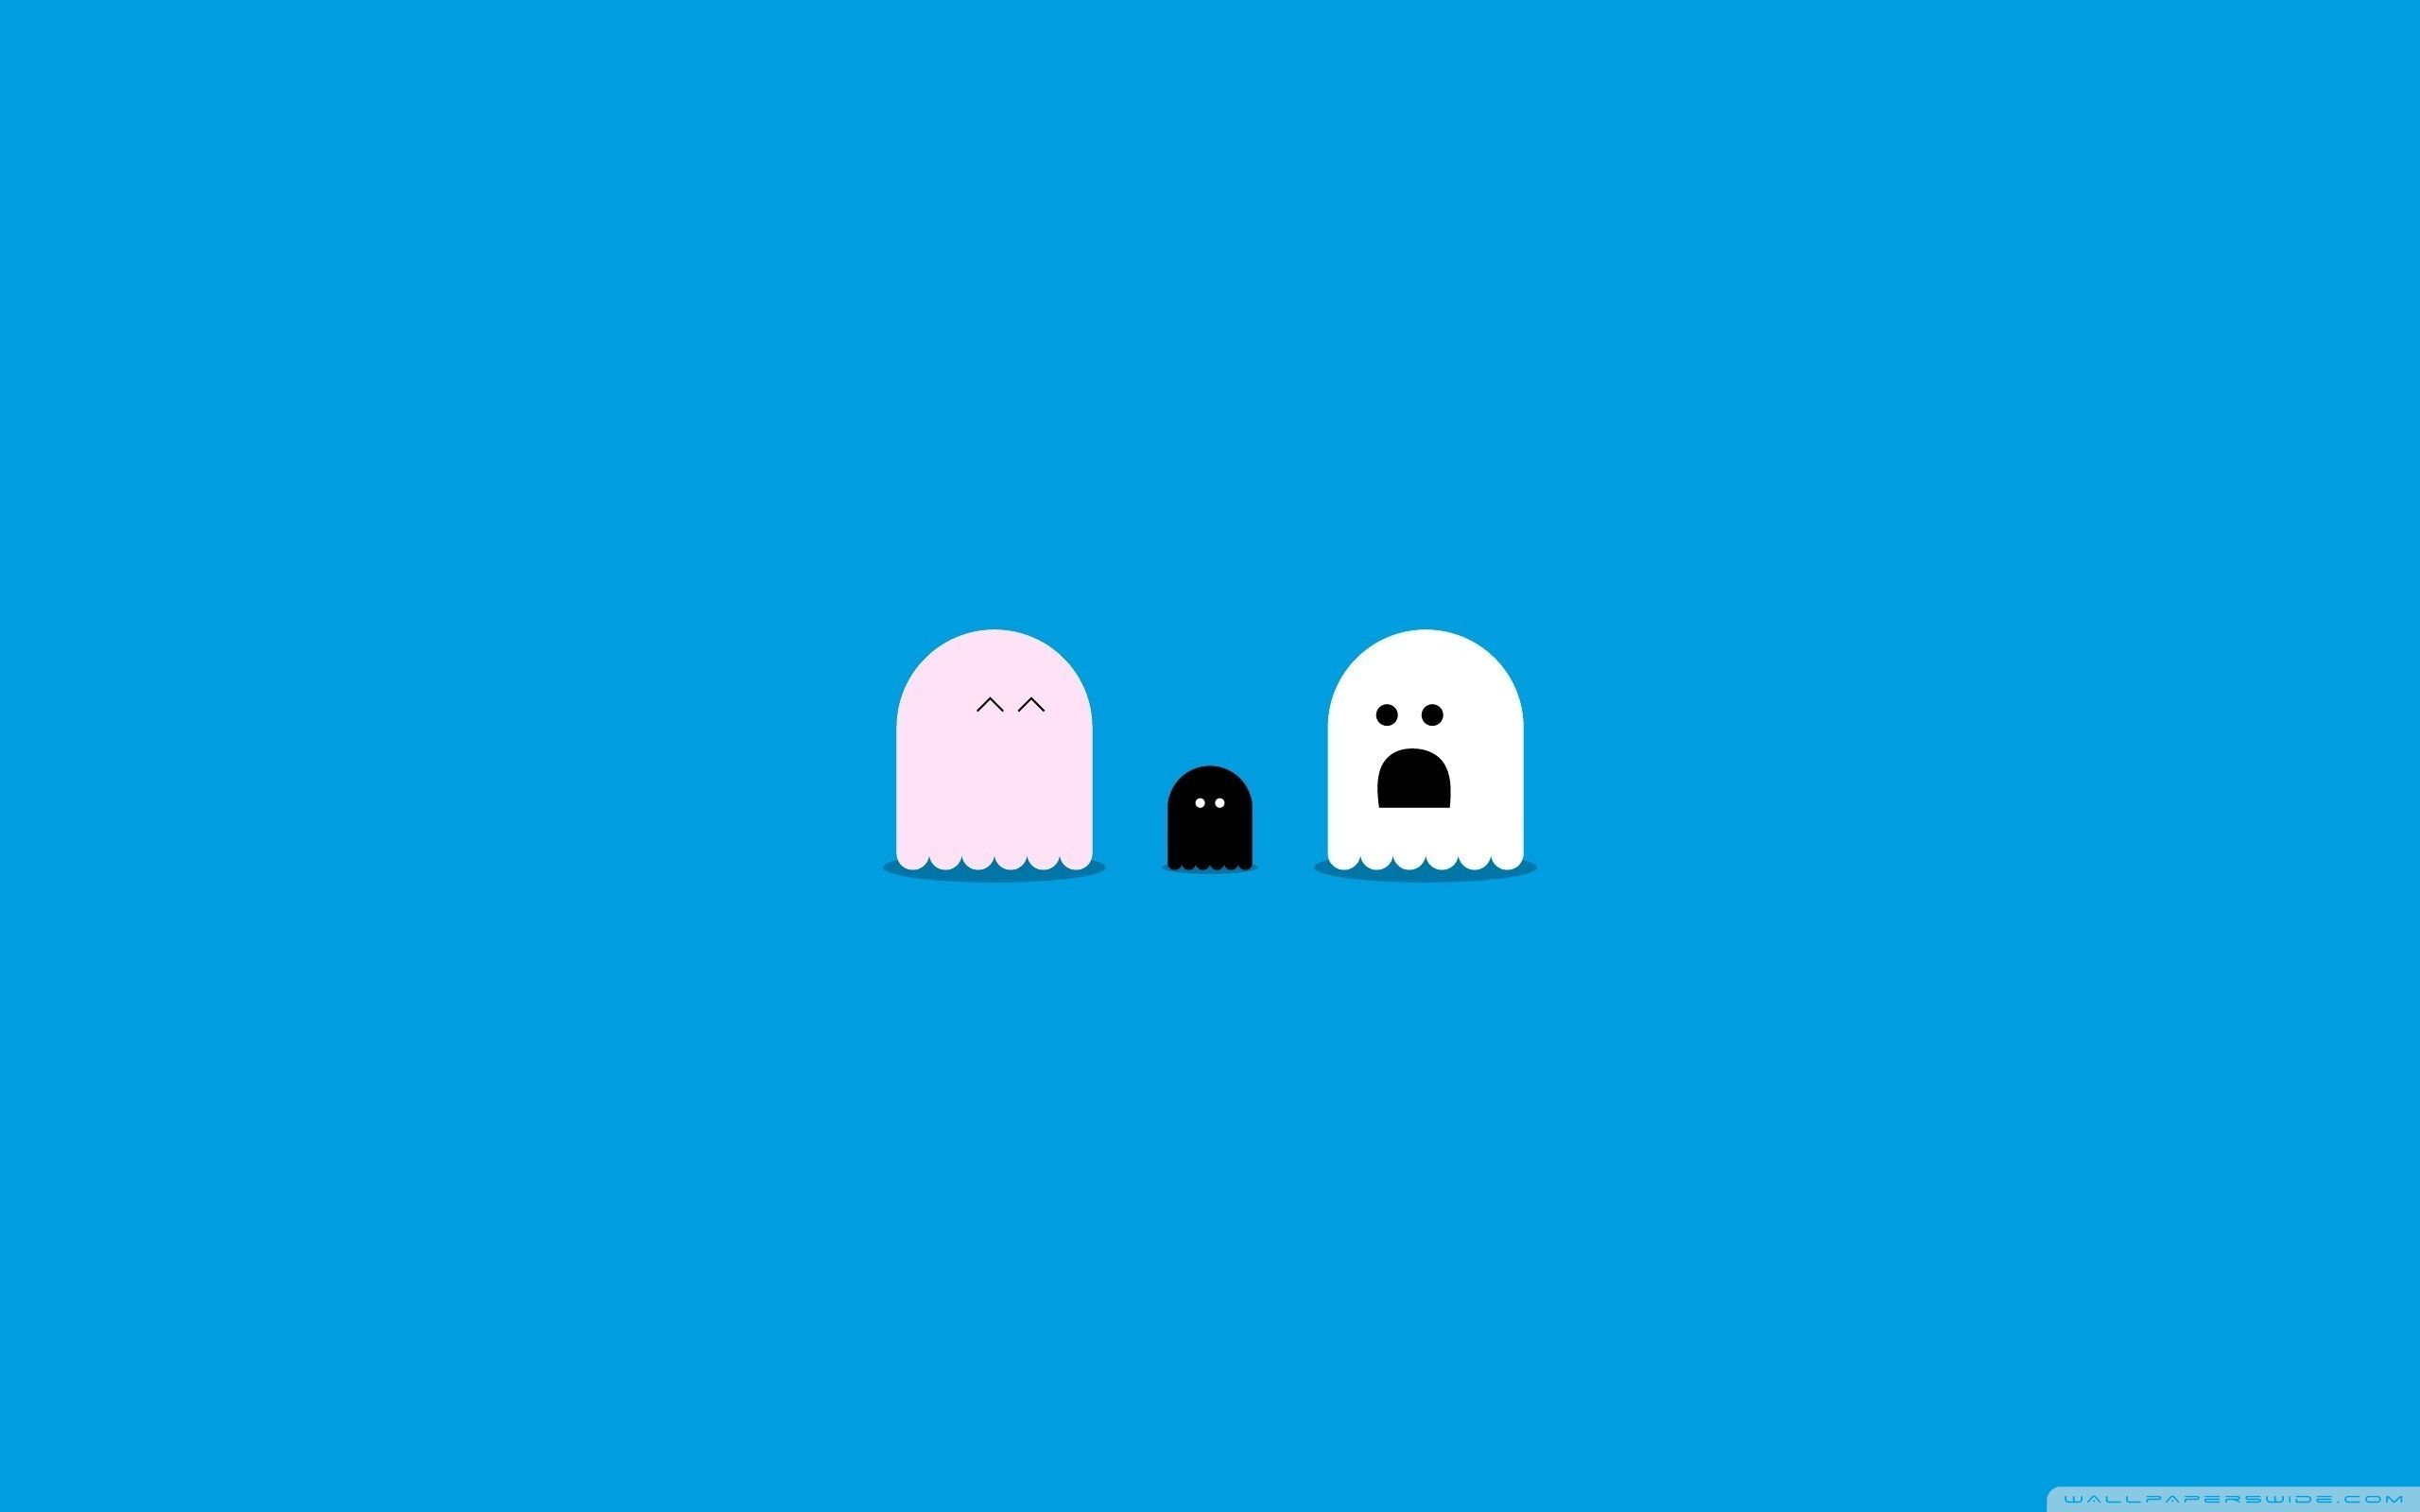 Funny Ghosts Situation Ultra HD Desktop Background Wallpaper for 4K UHD TV, Multi Display, Dual Monitor, Tablet